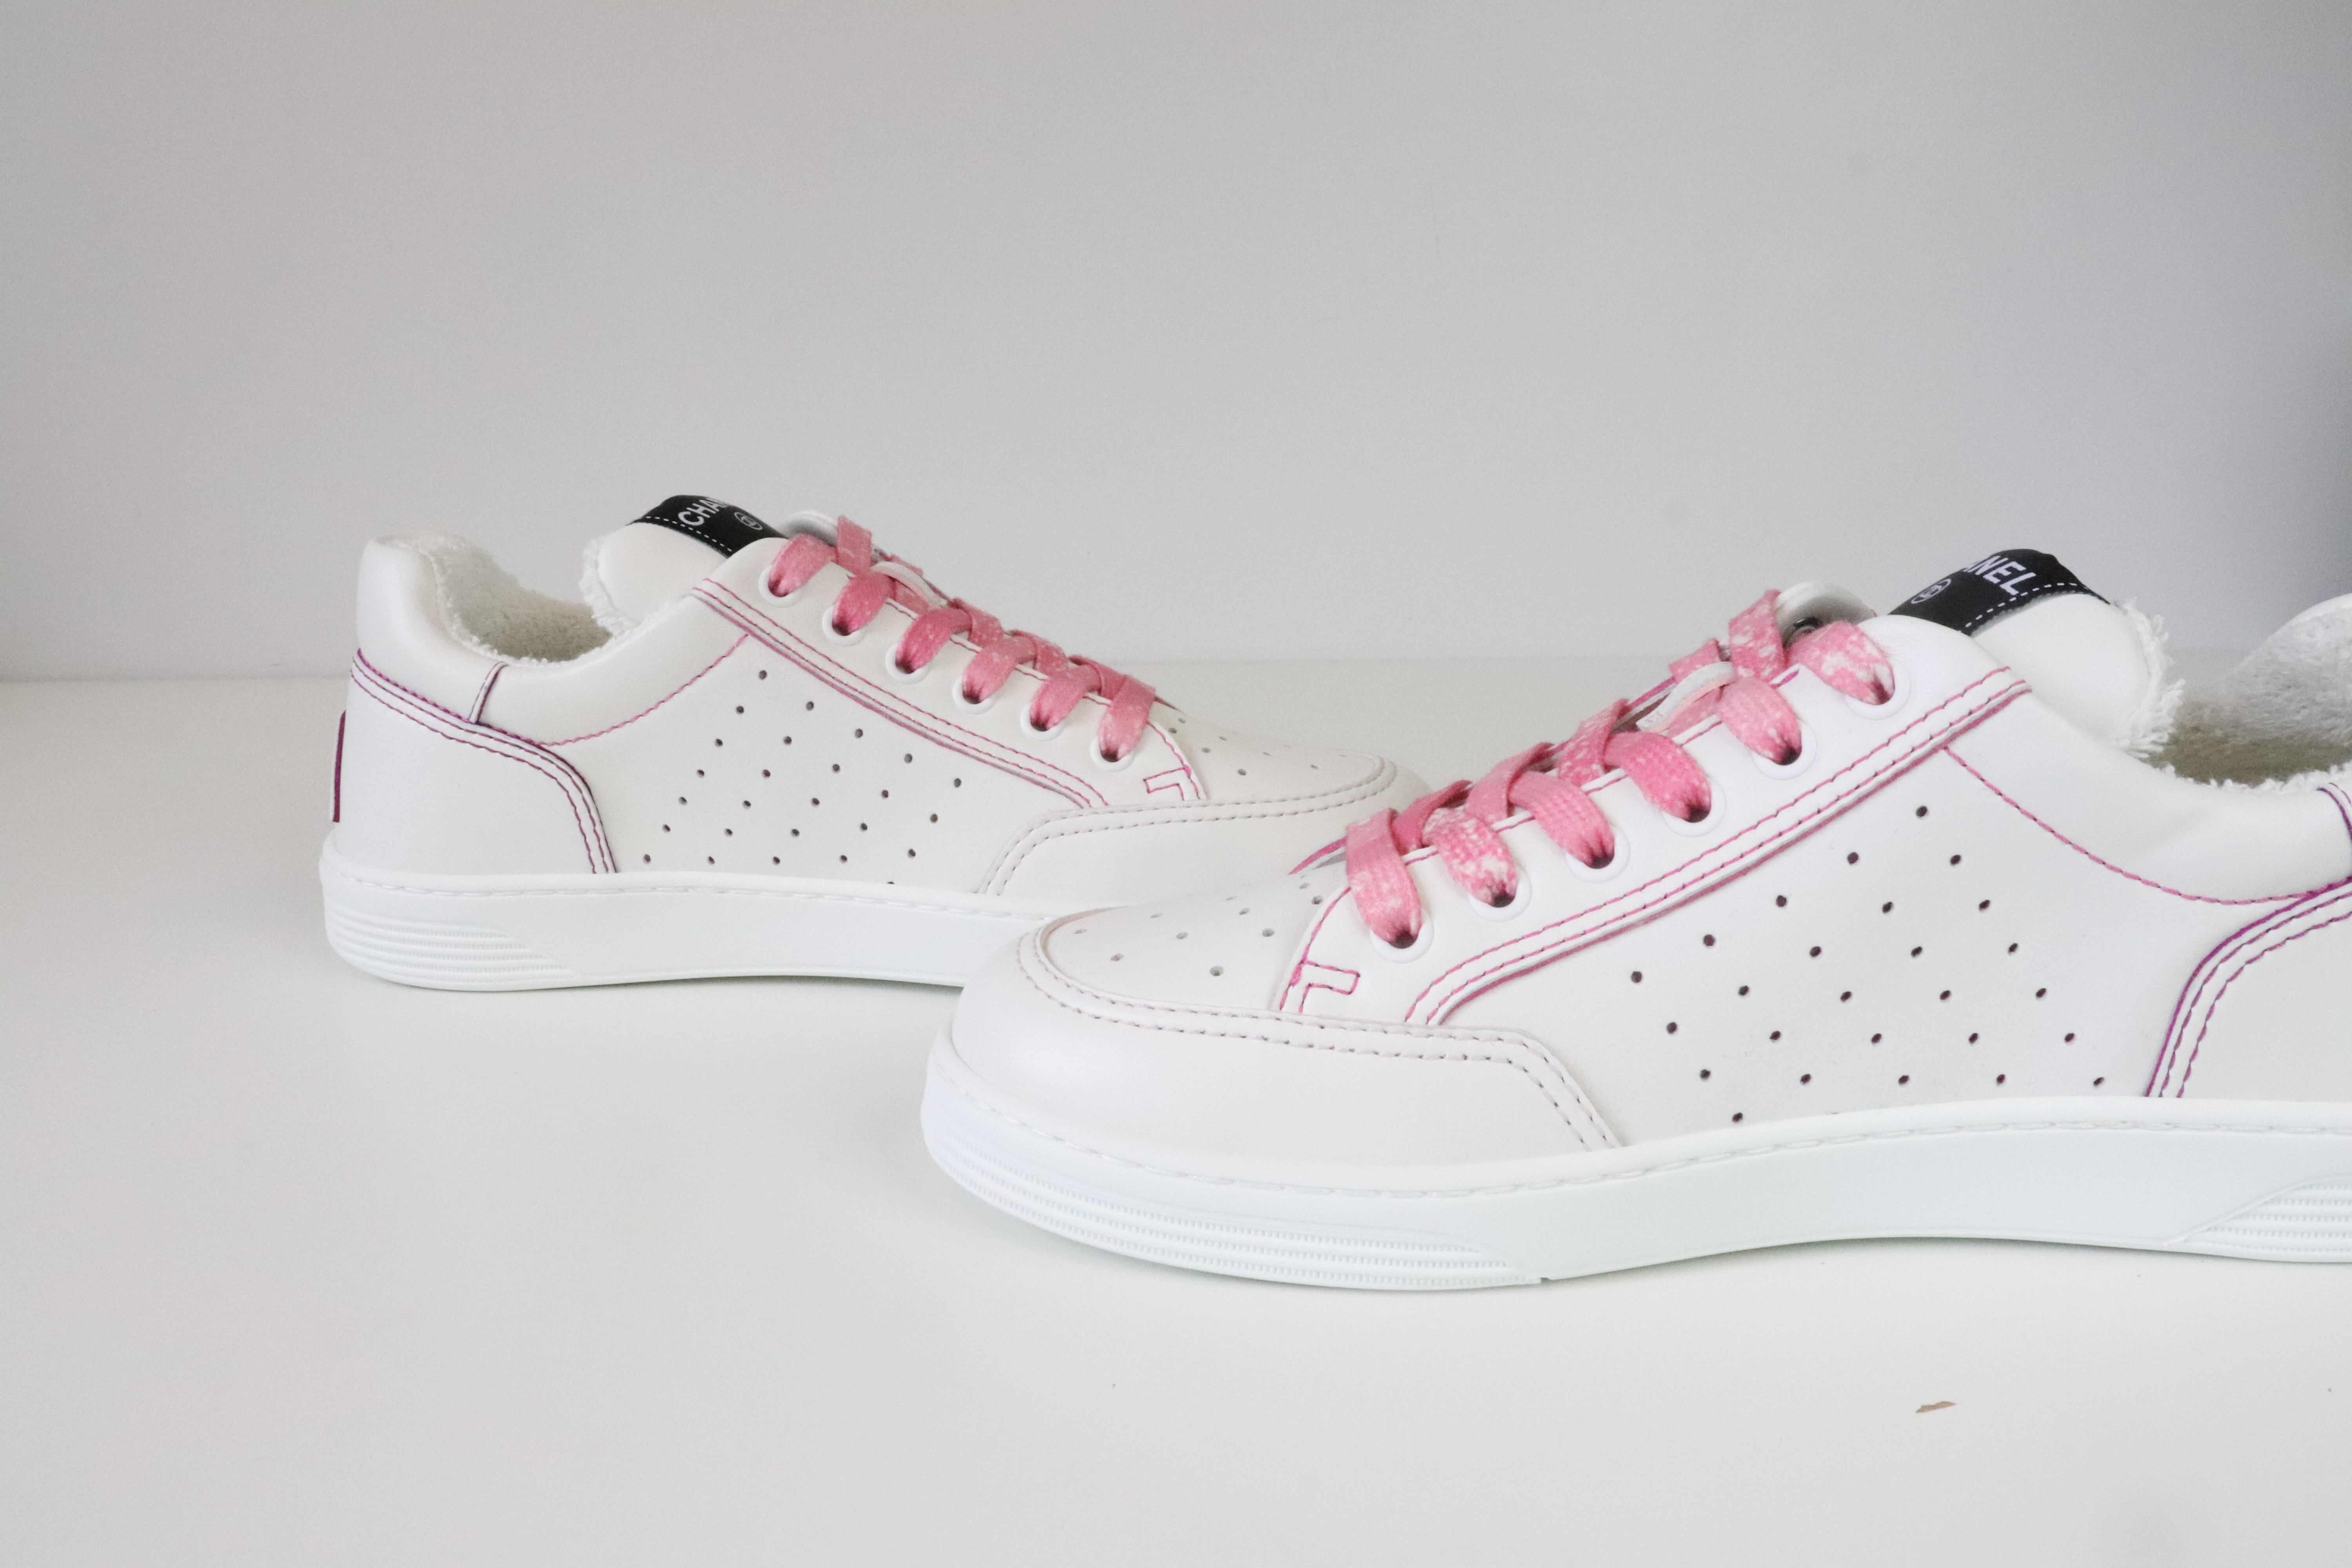 Chanel Shoes Sneakers White and Pink, New in Box - Julia Rose Boston